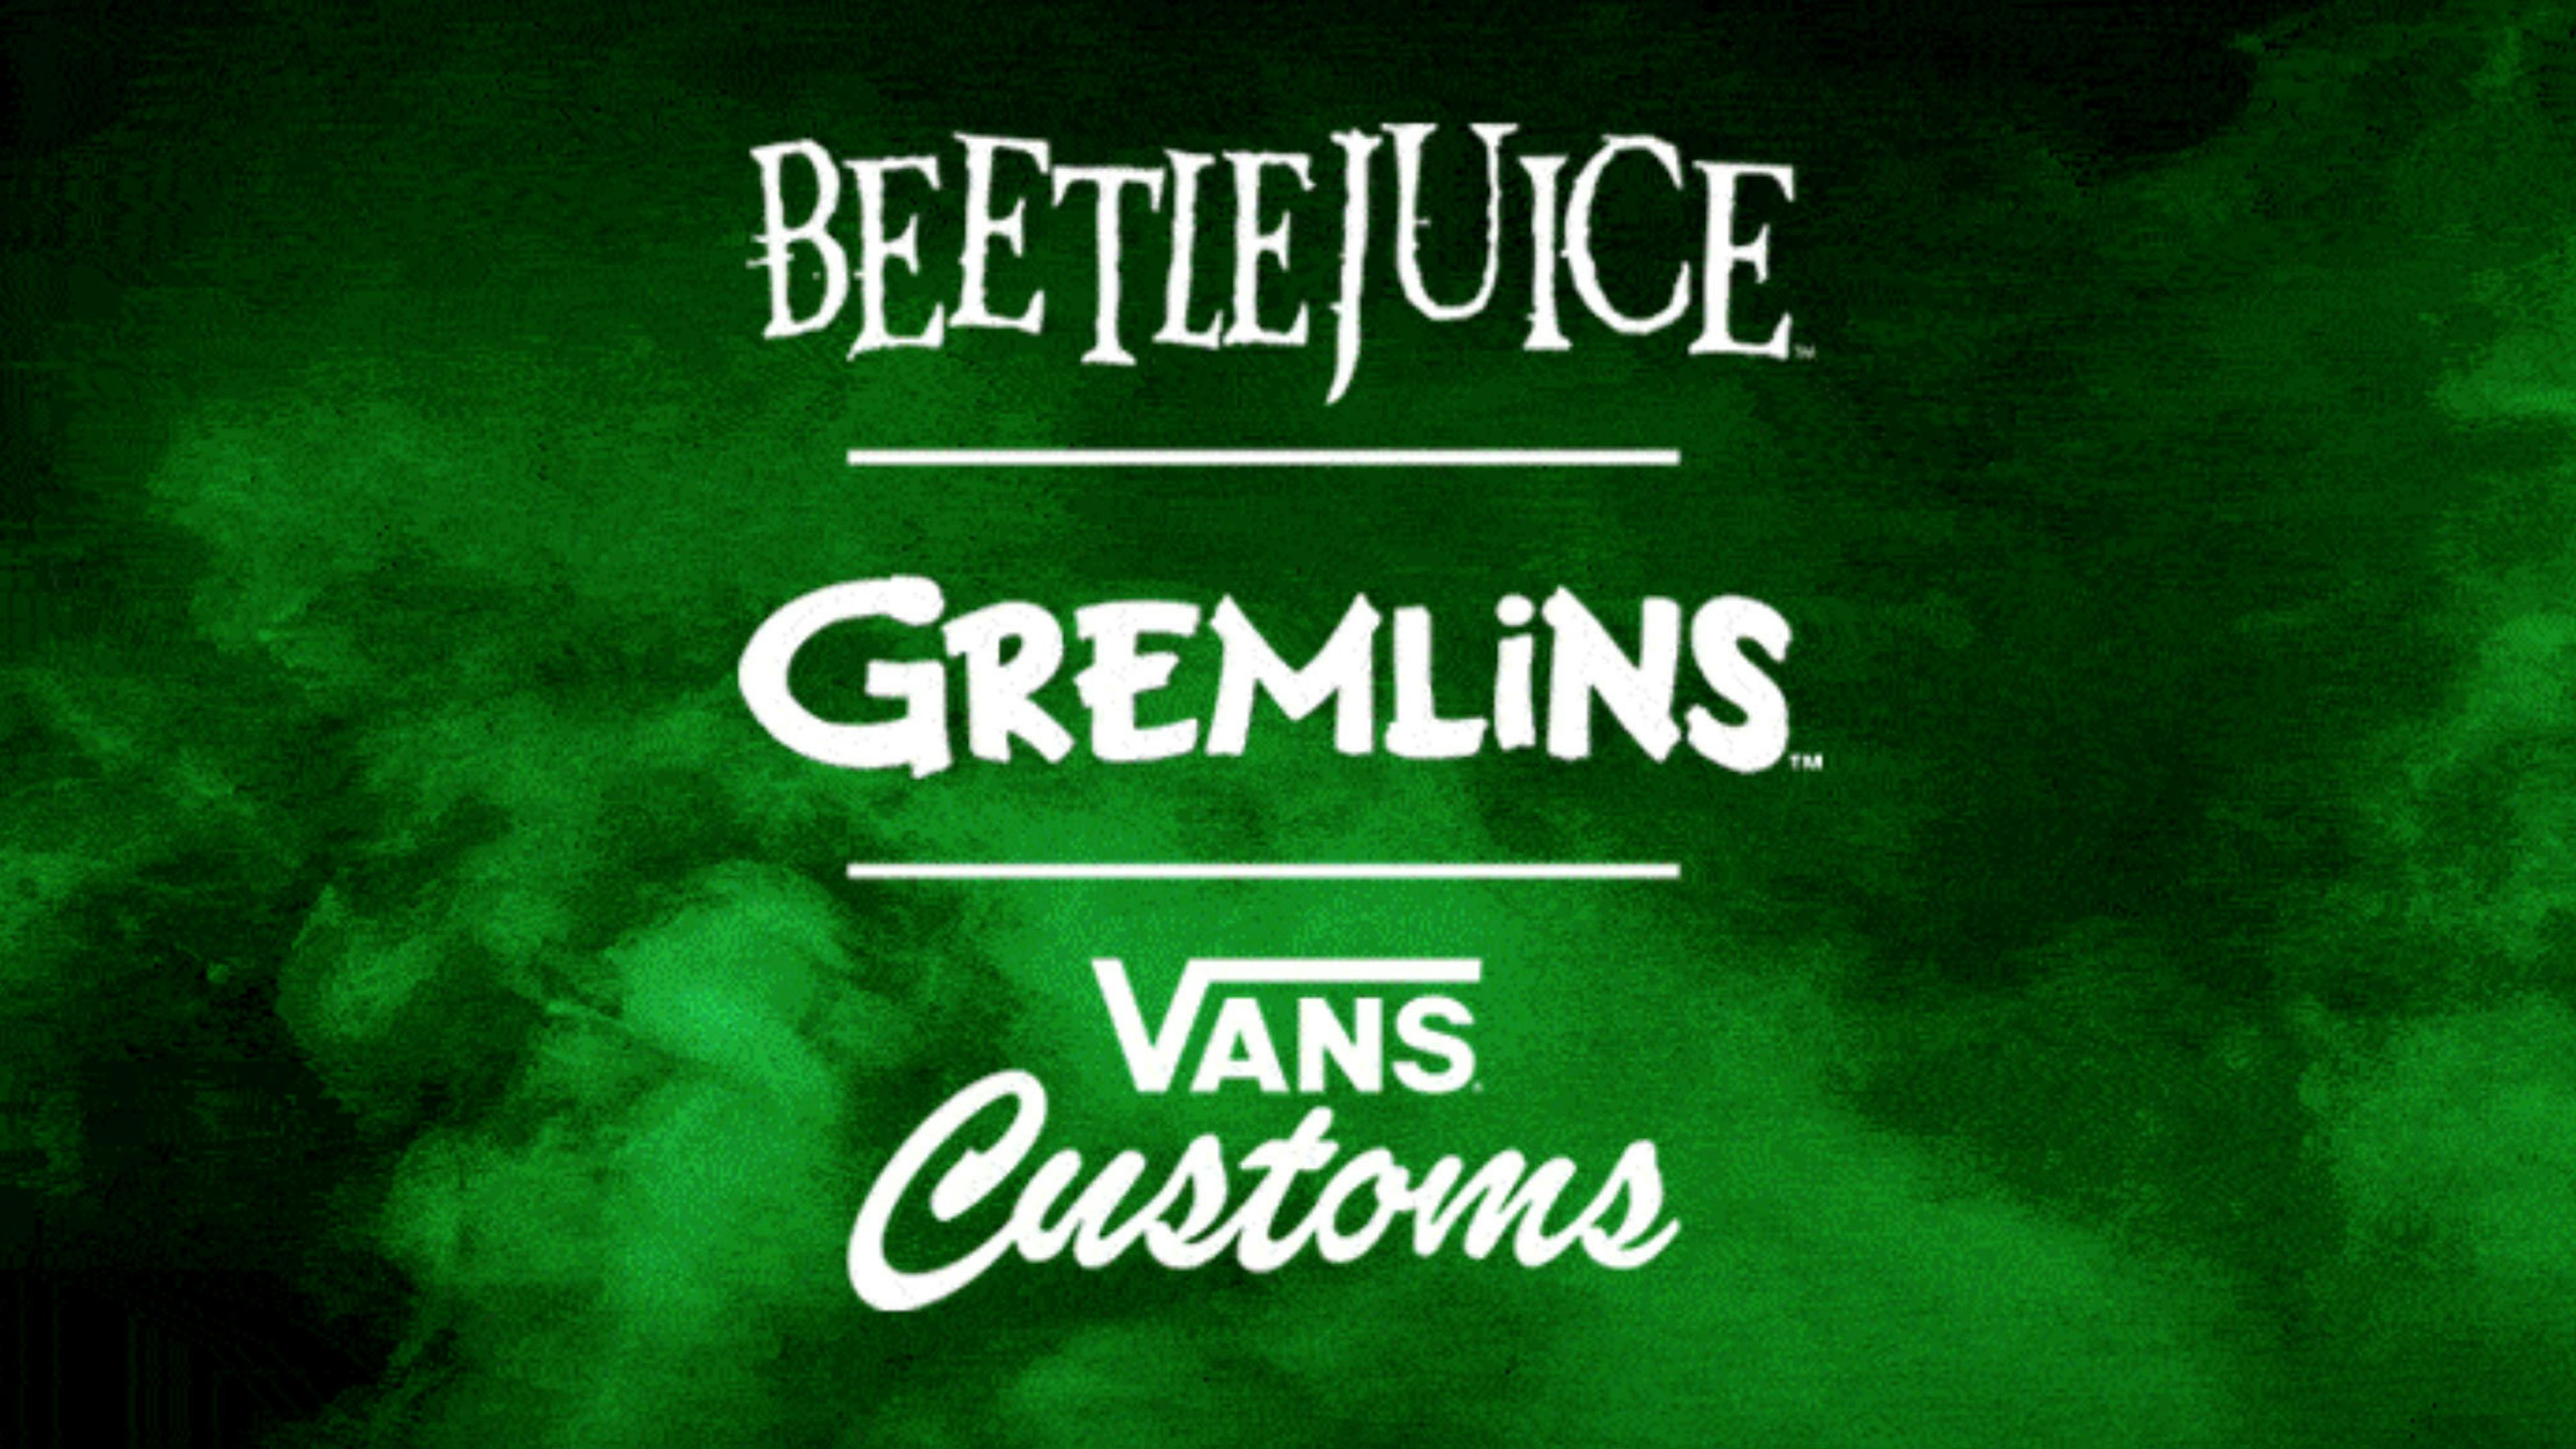 Vans unveil Beetlejuice and Gremlins themes as part of custom Horror selection